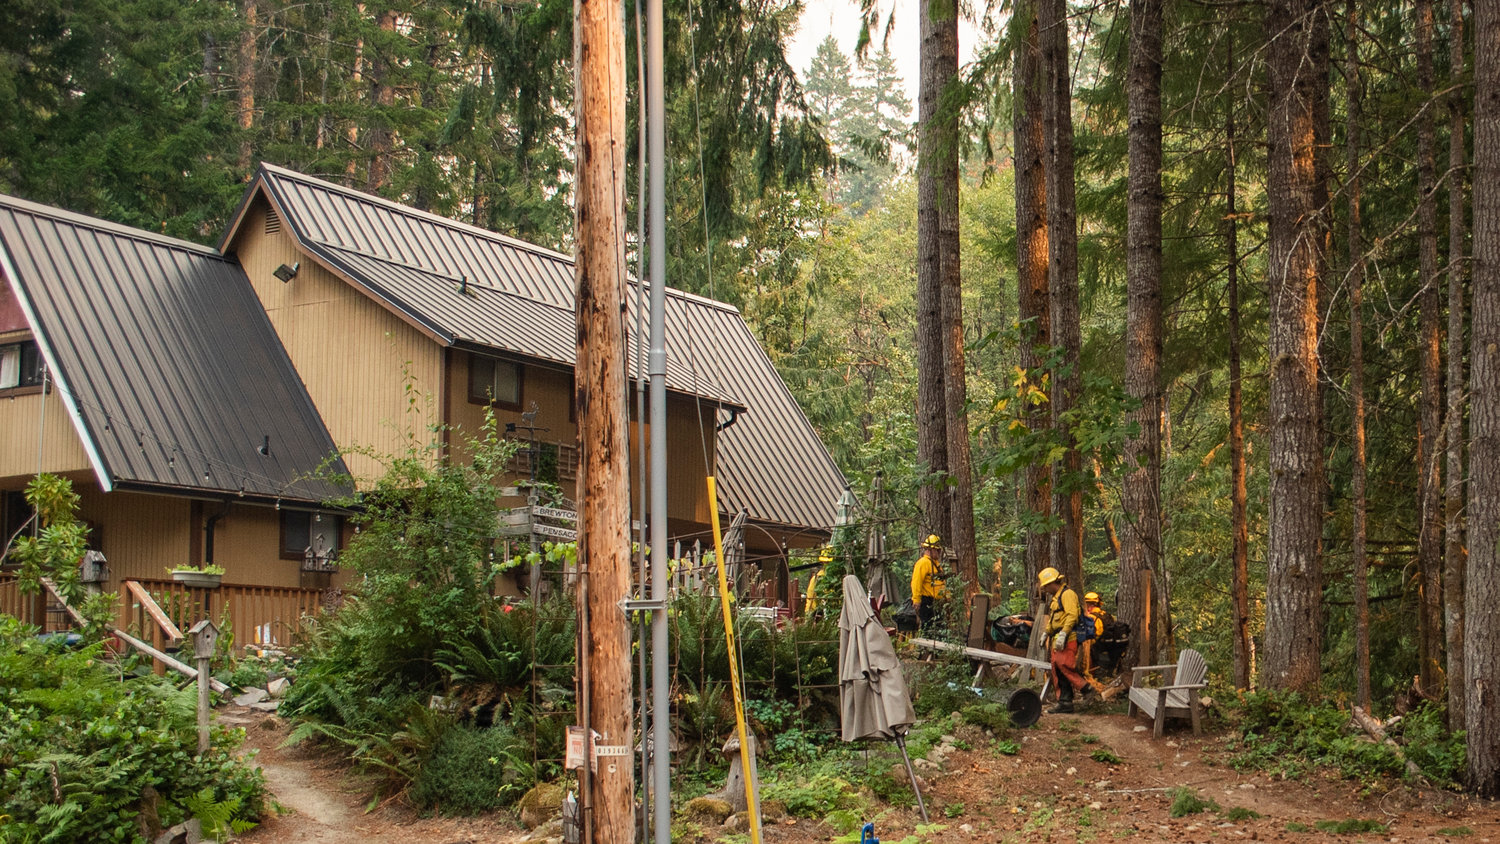 Firefighters from local agencies across Washington state work to create defensible space between trees and homes inside the Timberline neighborhood east of Packwood Saturday.